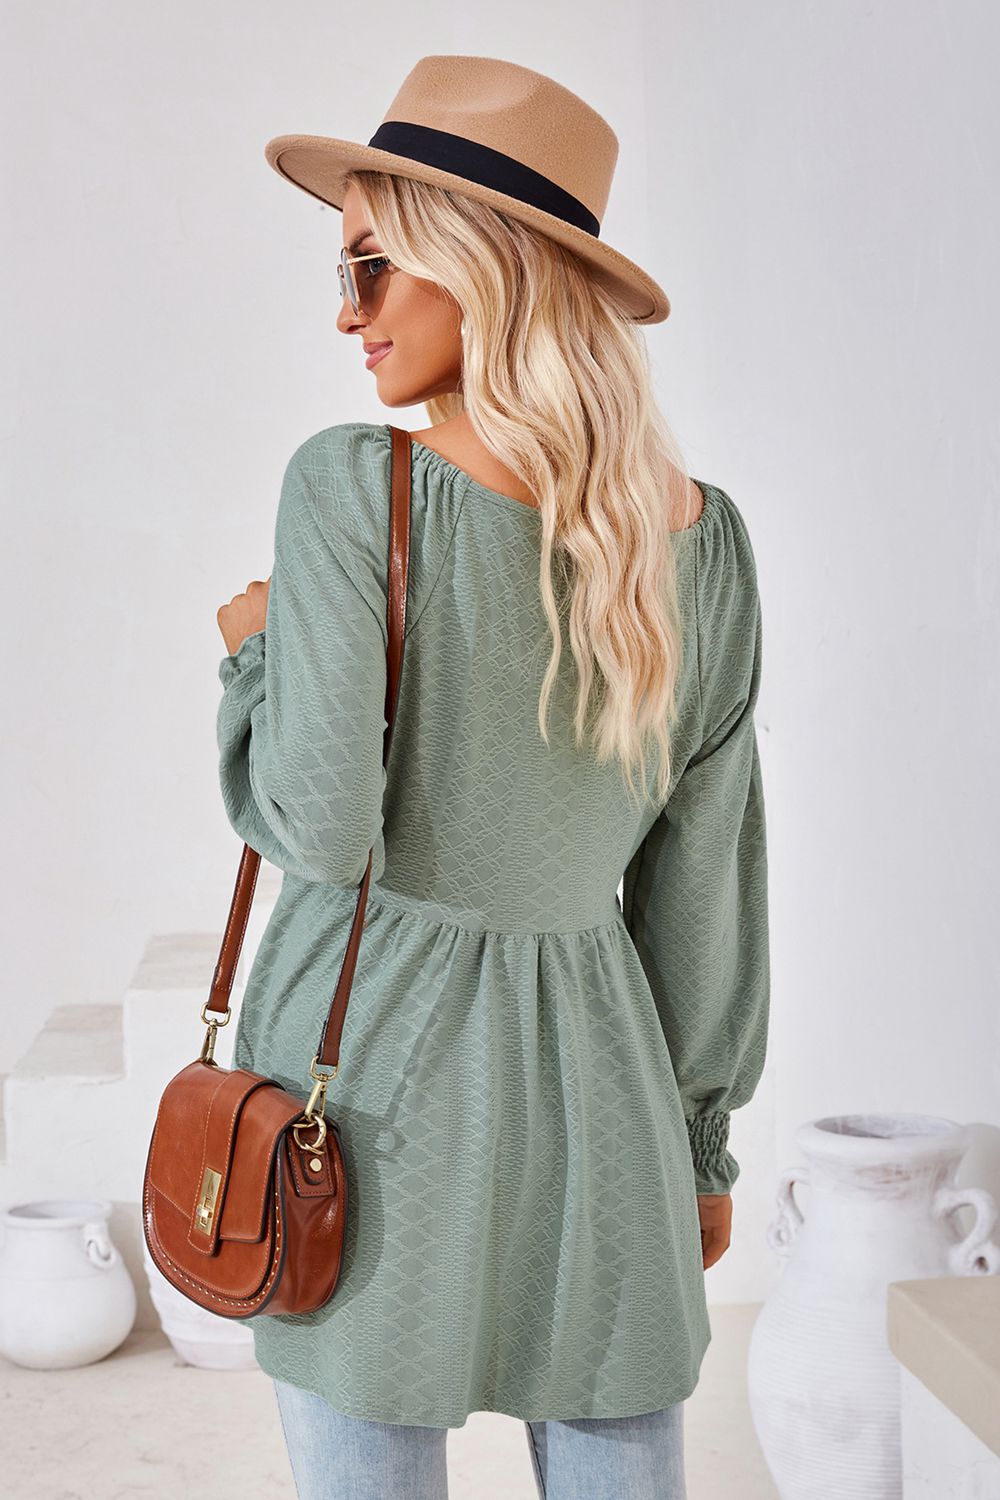 V-Neck Lantern Sleeve Blouse - Women’s Clothing & Accessories - Shirts & Tops - 9 - 2024